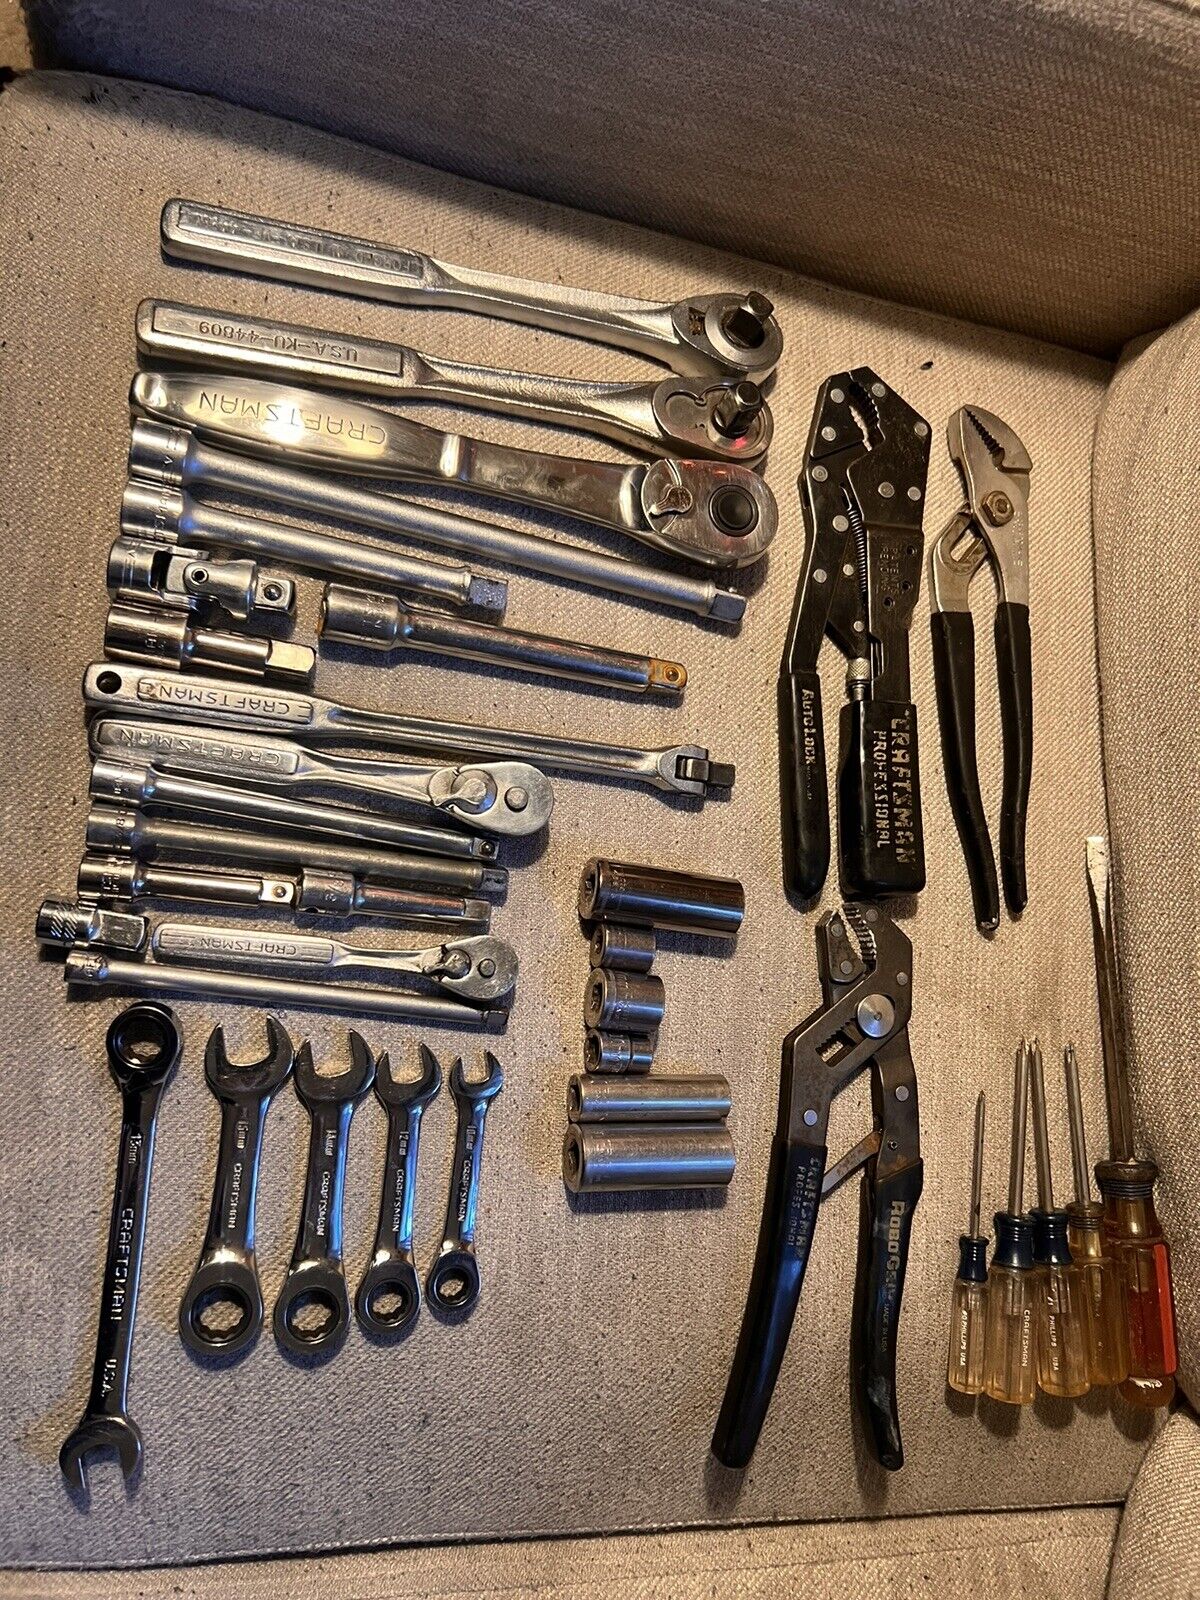 Huge 32pc Craftsman Tool Lot w/ free MOLLE pouch LOOK